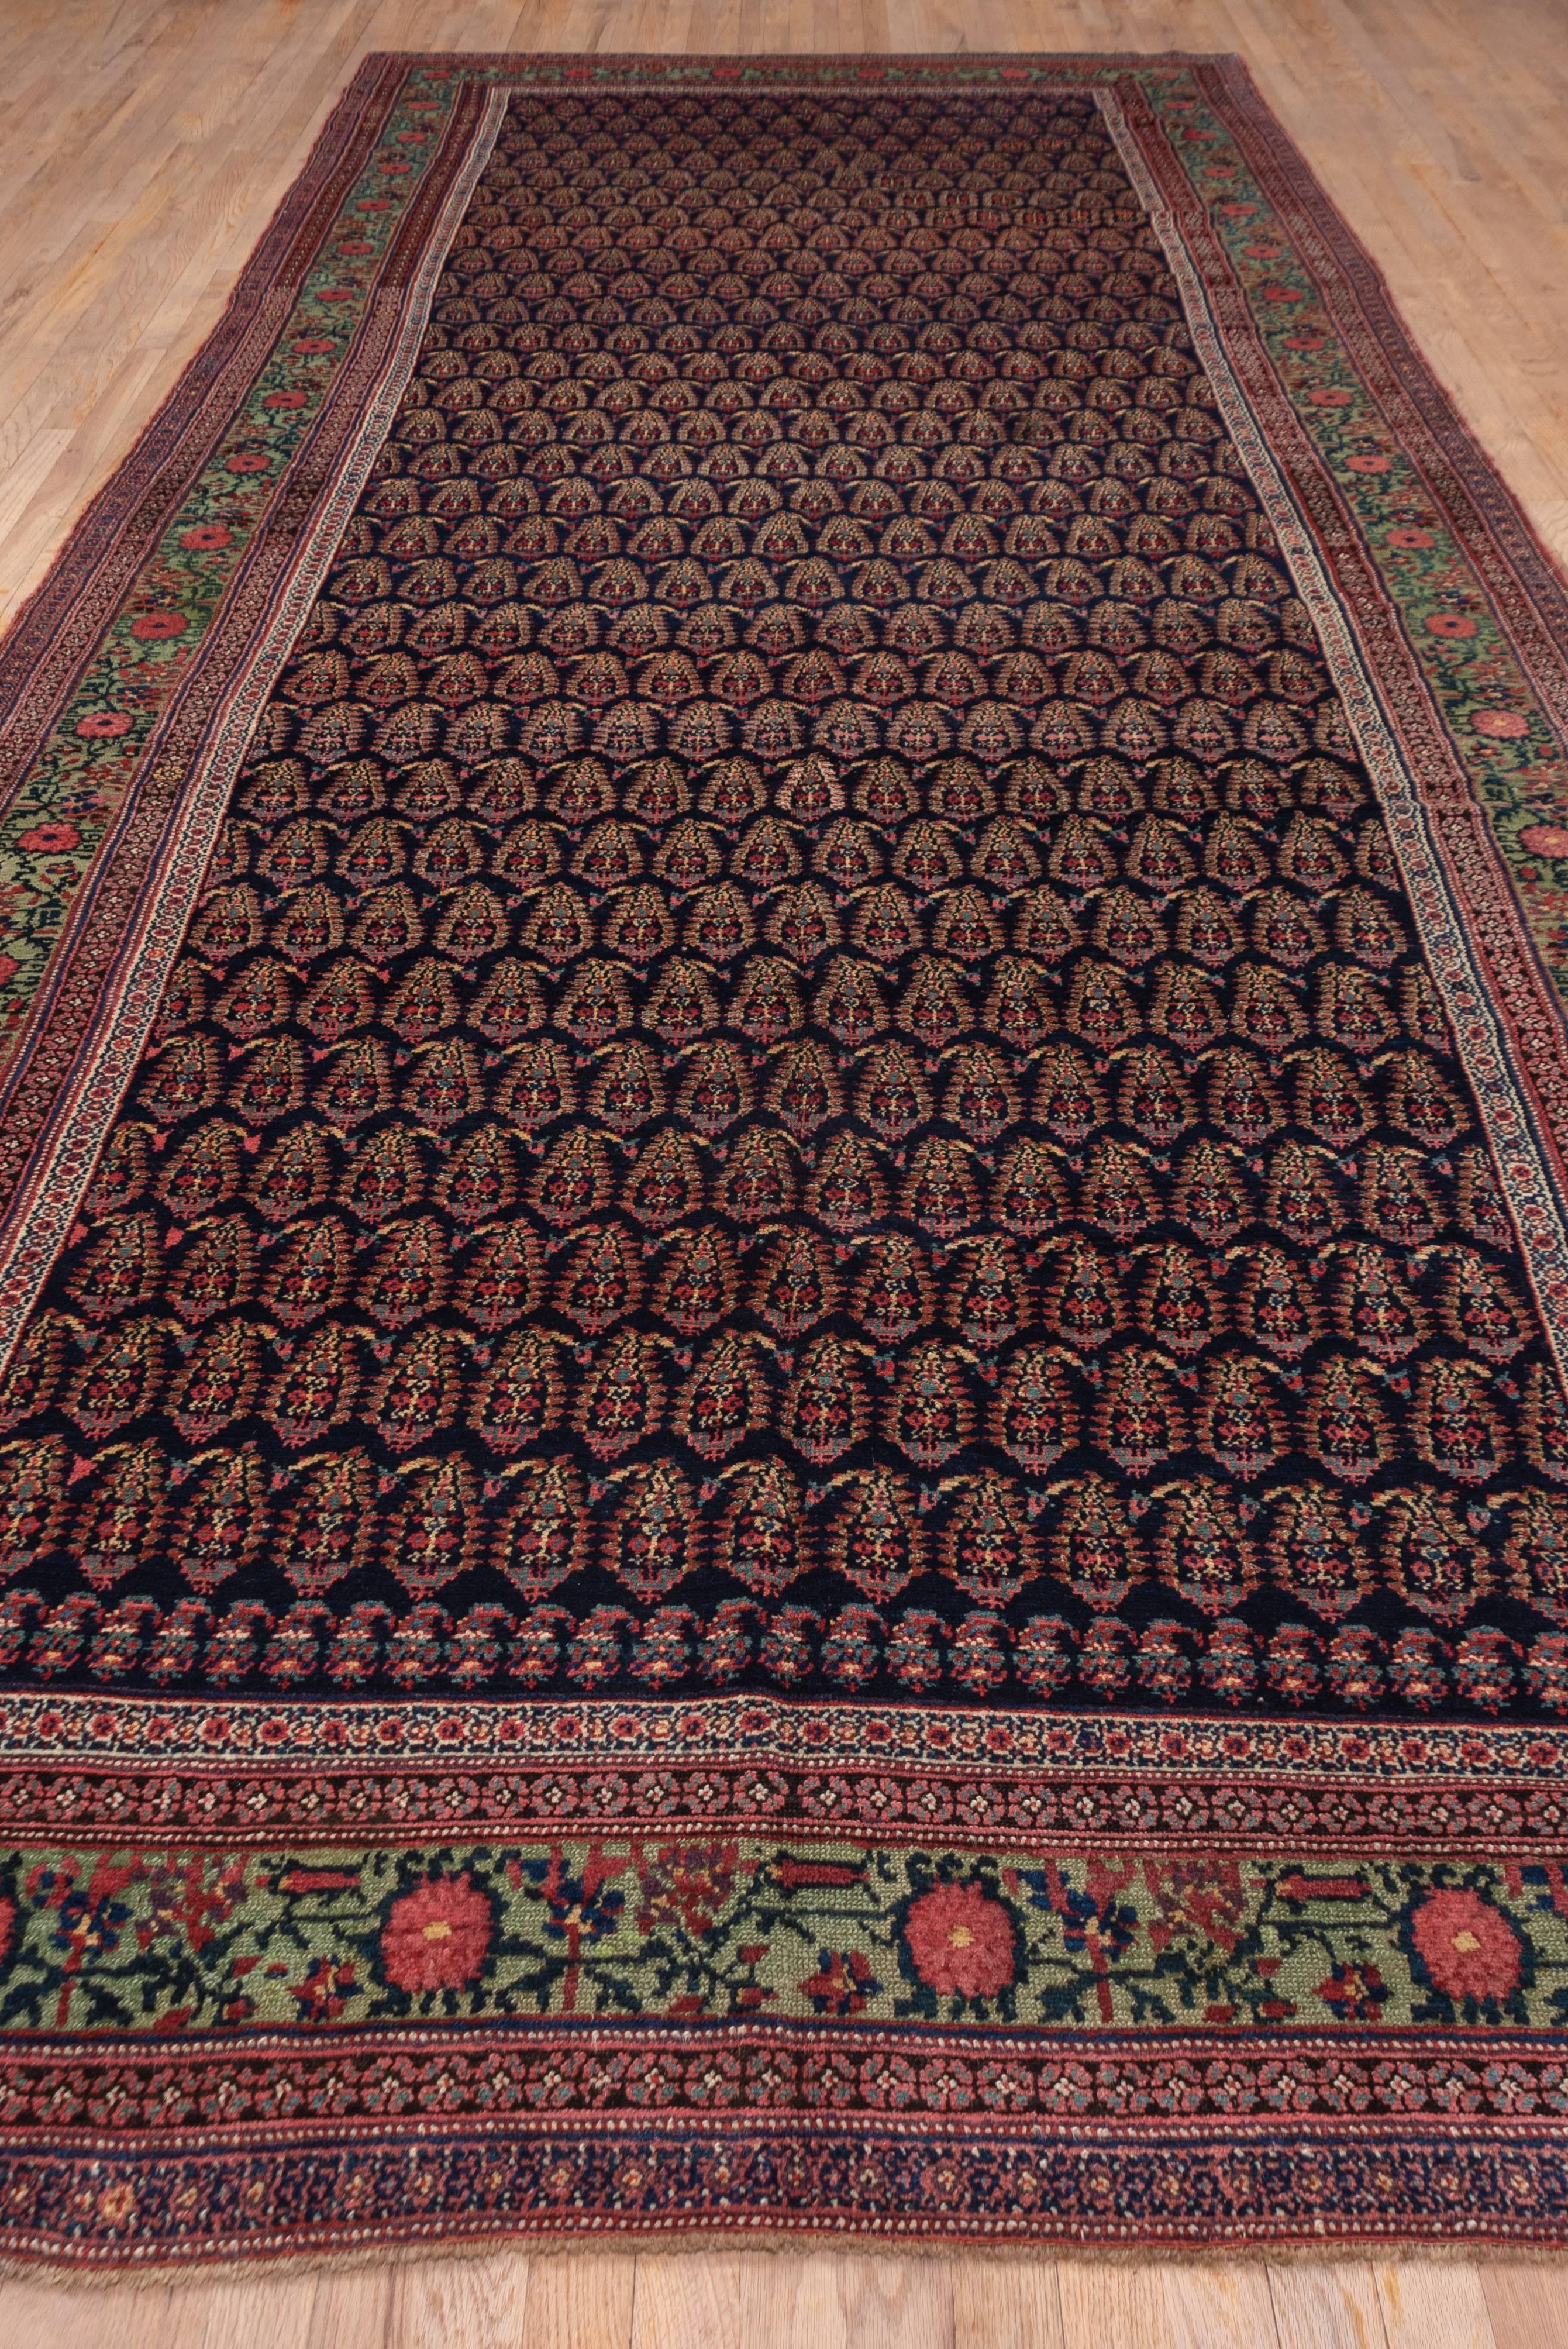 Antique Tribal Persian Malayer Gallery Carpet In Excellent Condition For Sale In New York, NY